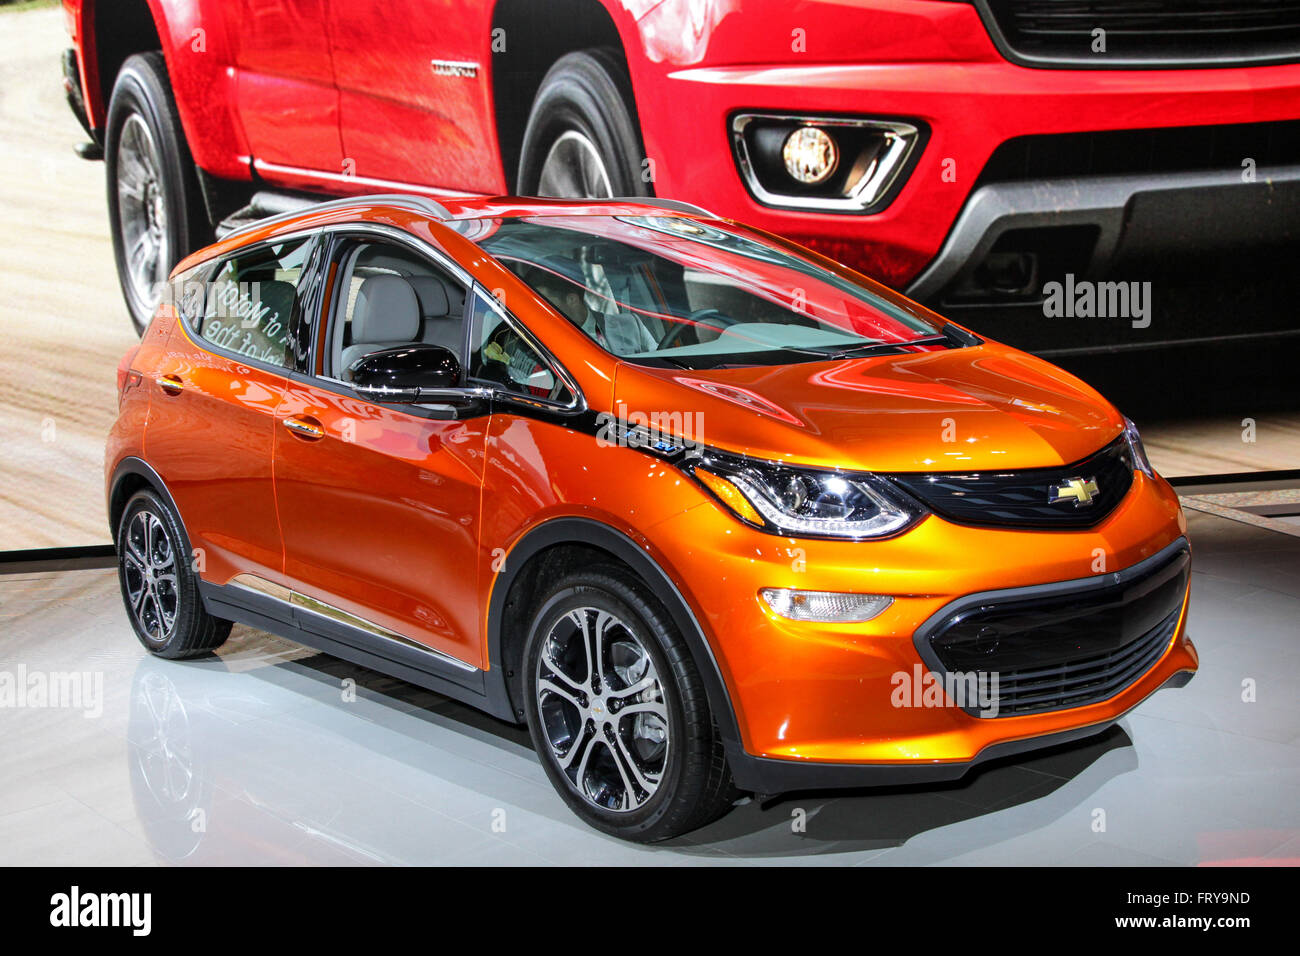 Manhattan, New York, USA. 23rd Mar, 2016. A Chevrolet Bolt EV shown at the New York International Auto Show 2016, at the Jacob Javits Center. This was Press Preview Day one of NYIAS, and the Trade Show will be open to the public for ten days, March 25th through April 3rd. Credit:  Miro Vrlik Photography/Alamy Live News Stock Photo